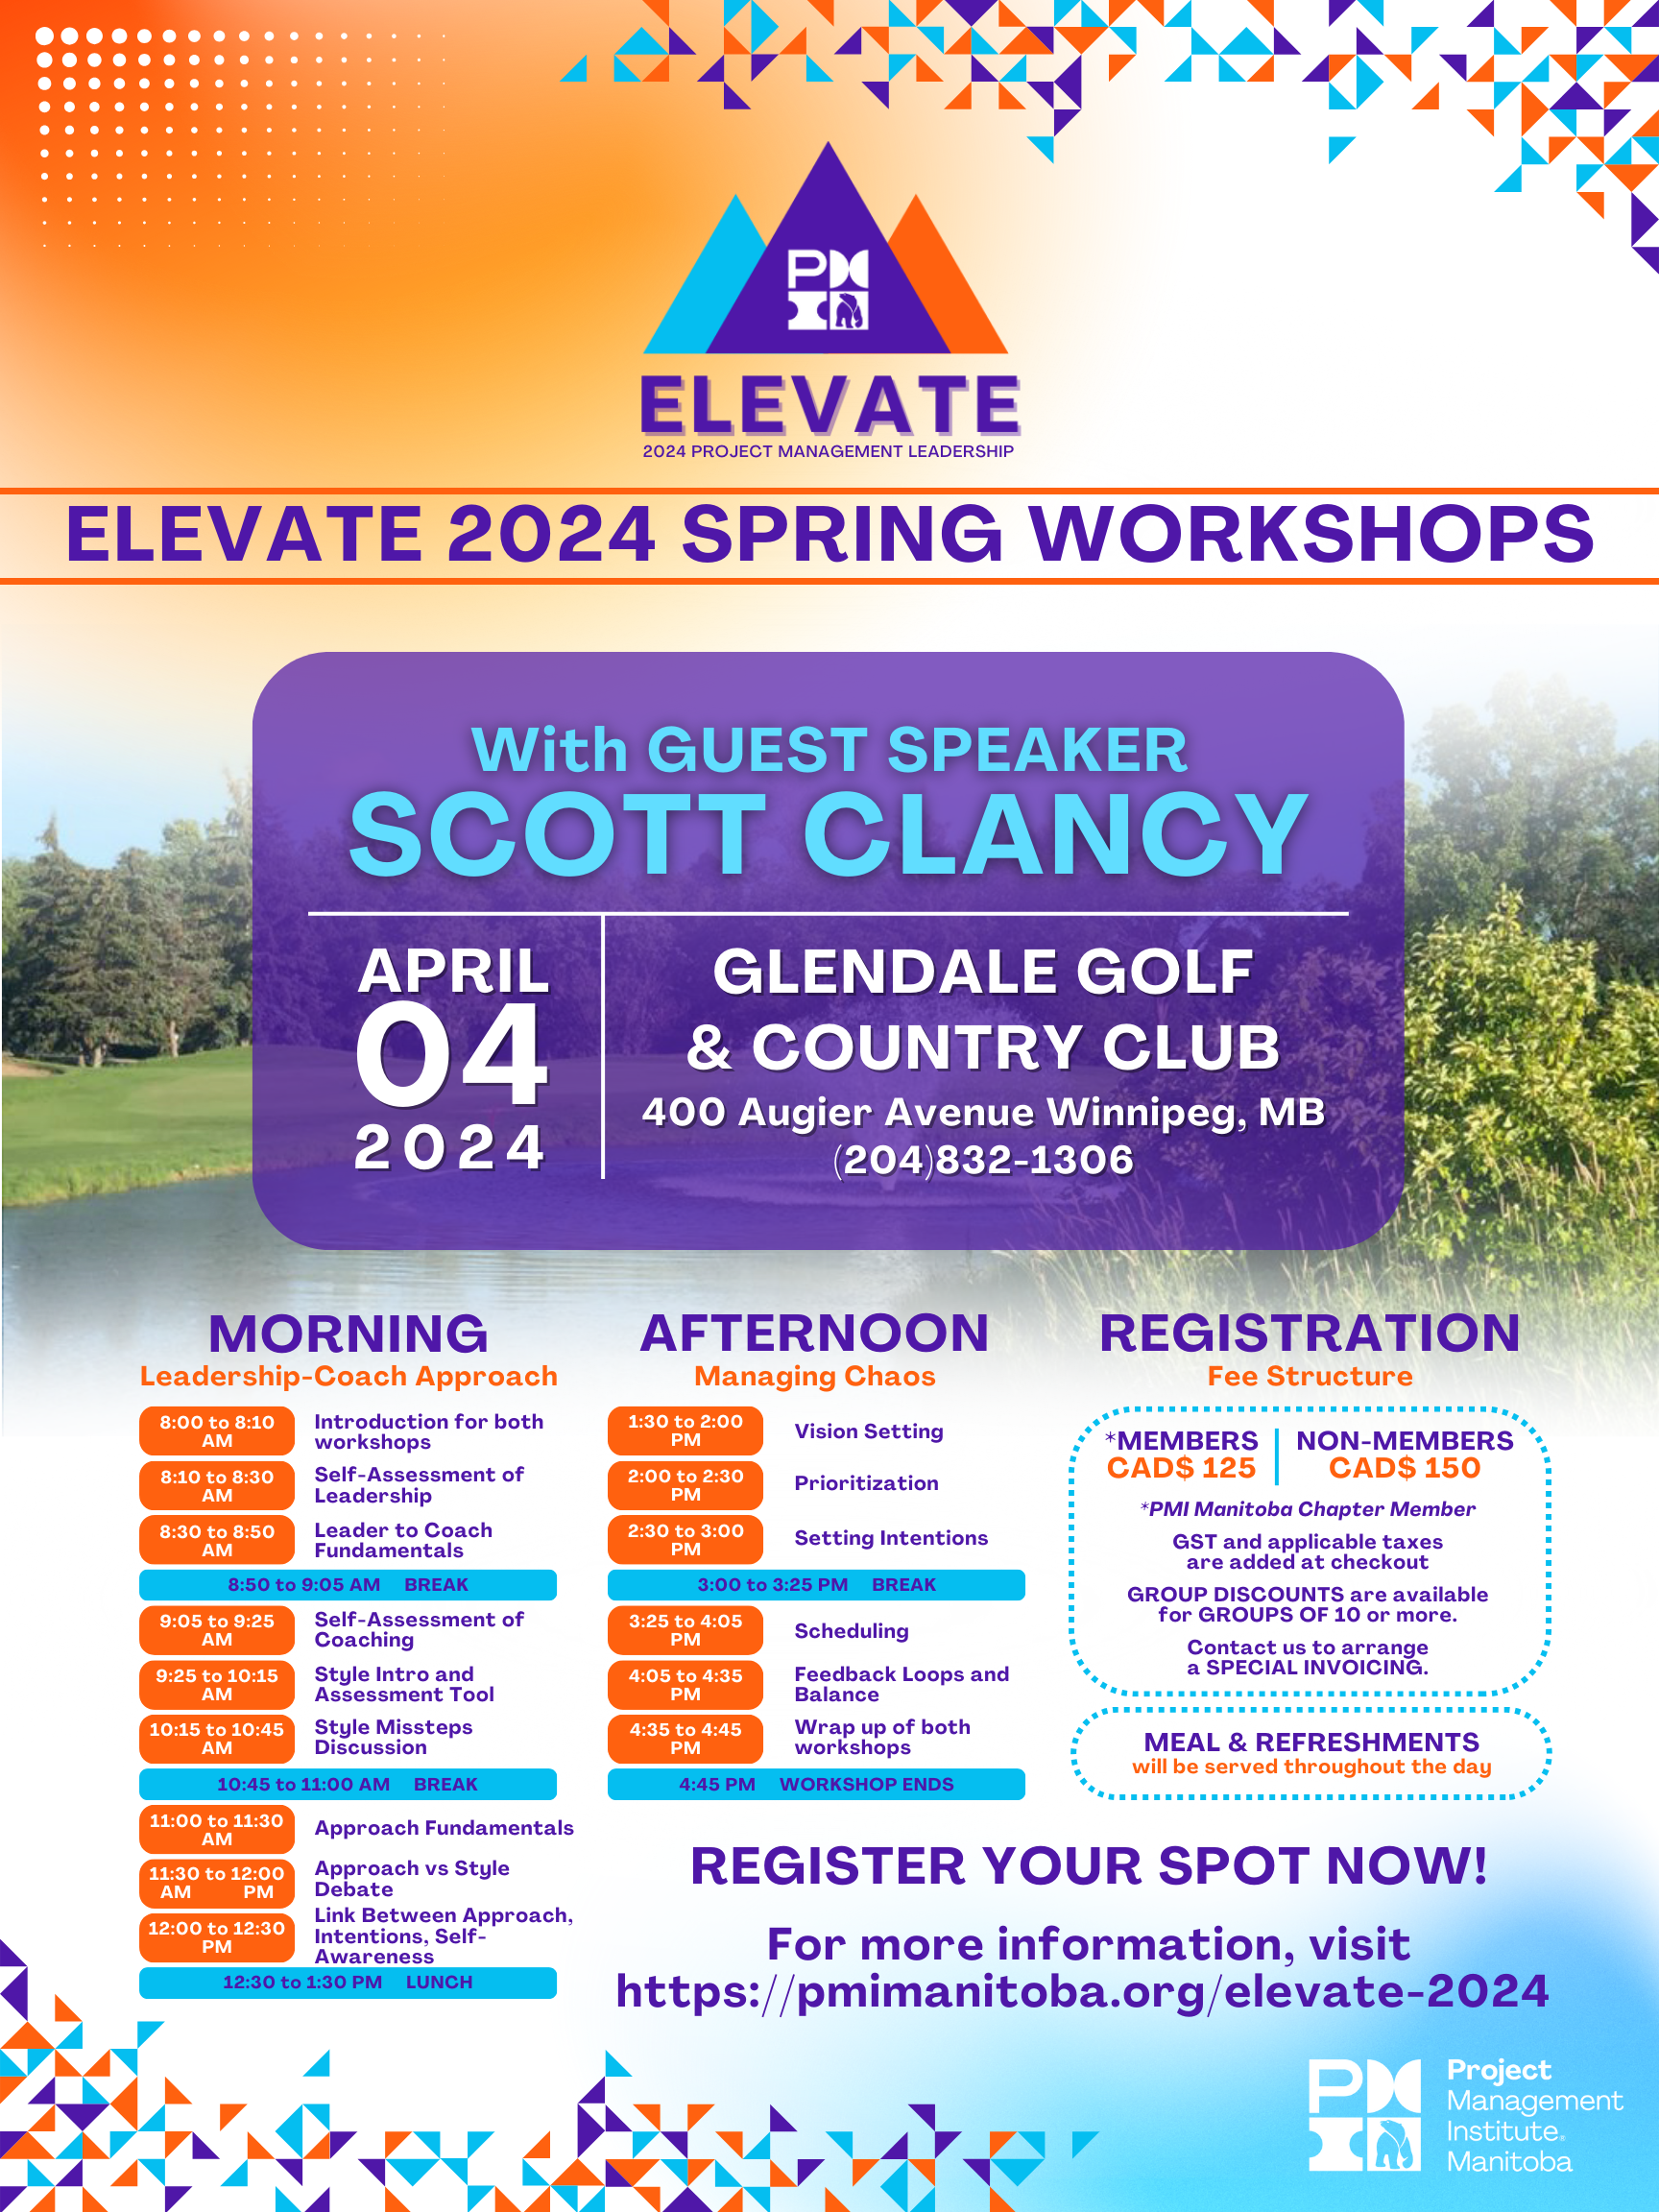 Elevate-2024---Poster-(18x24)_1.png